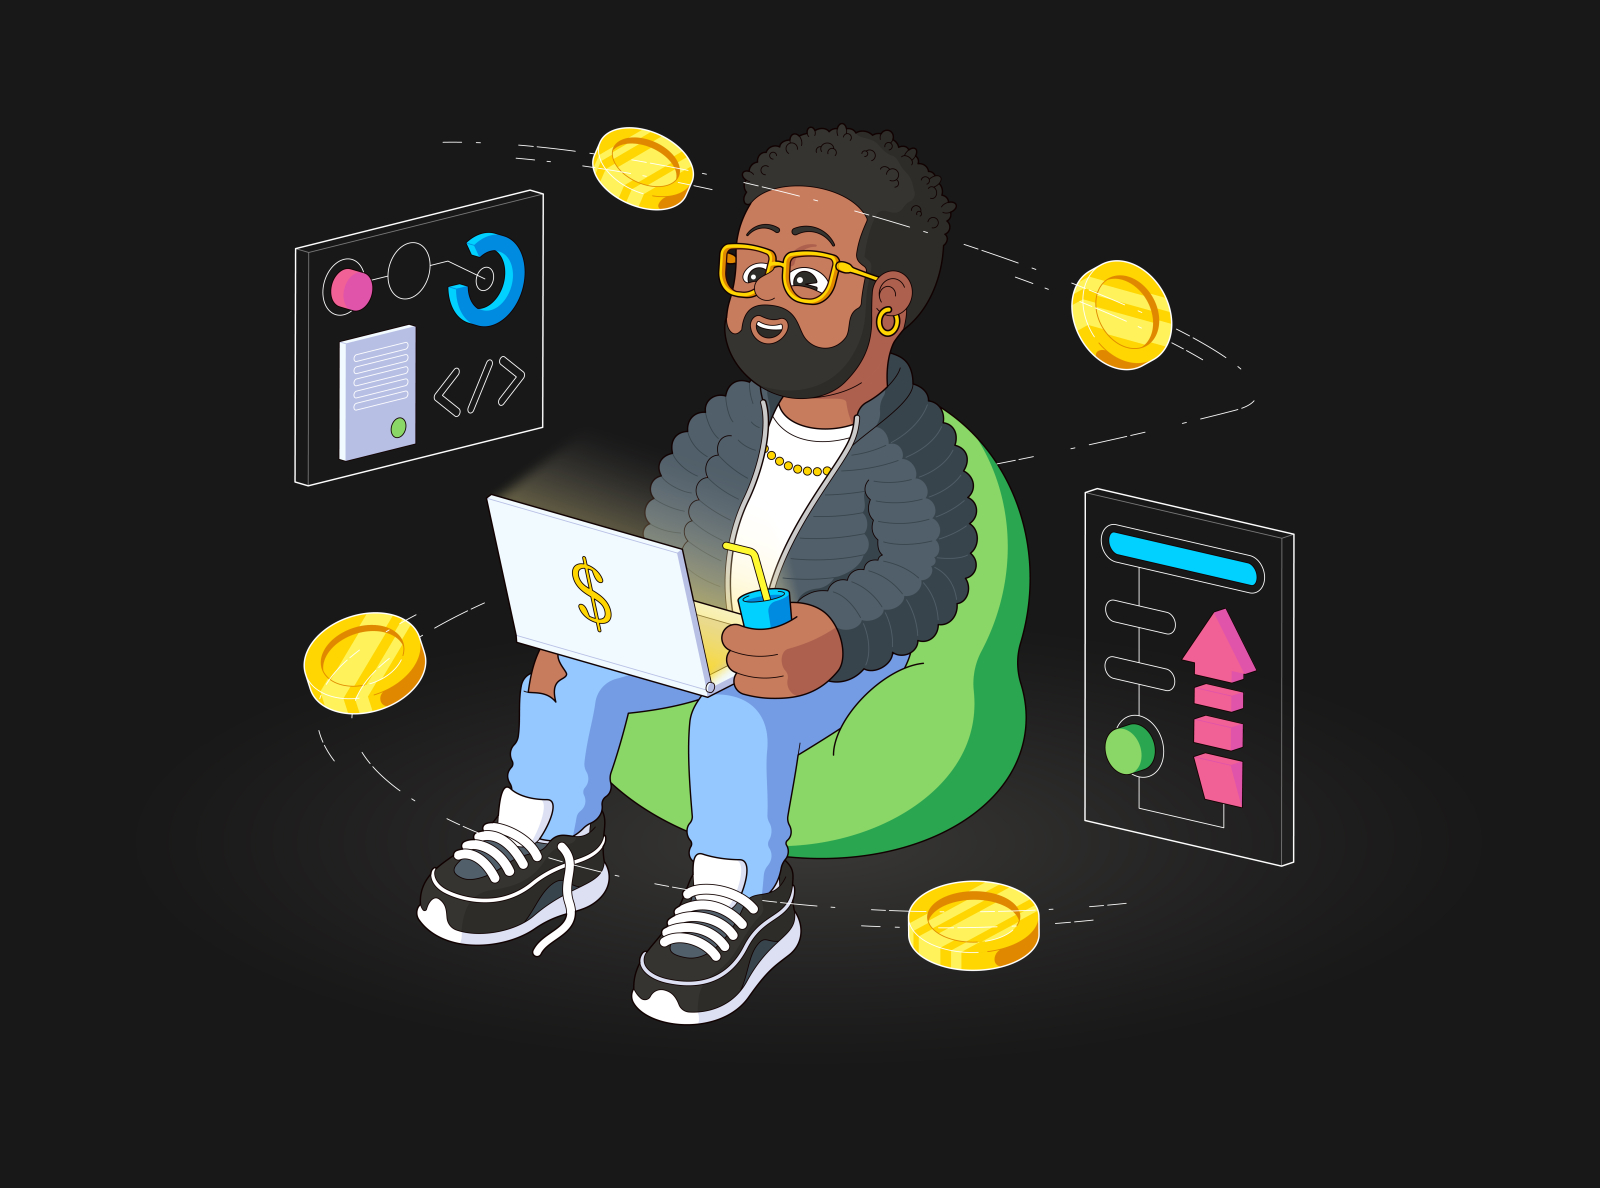 The work is booming, the coin is spinning 💰💸💪🏻😎 advertisement cryptocurrency 2021 work night creativity money character design character illustration illustrator 2d art 2d design vector vector illustration